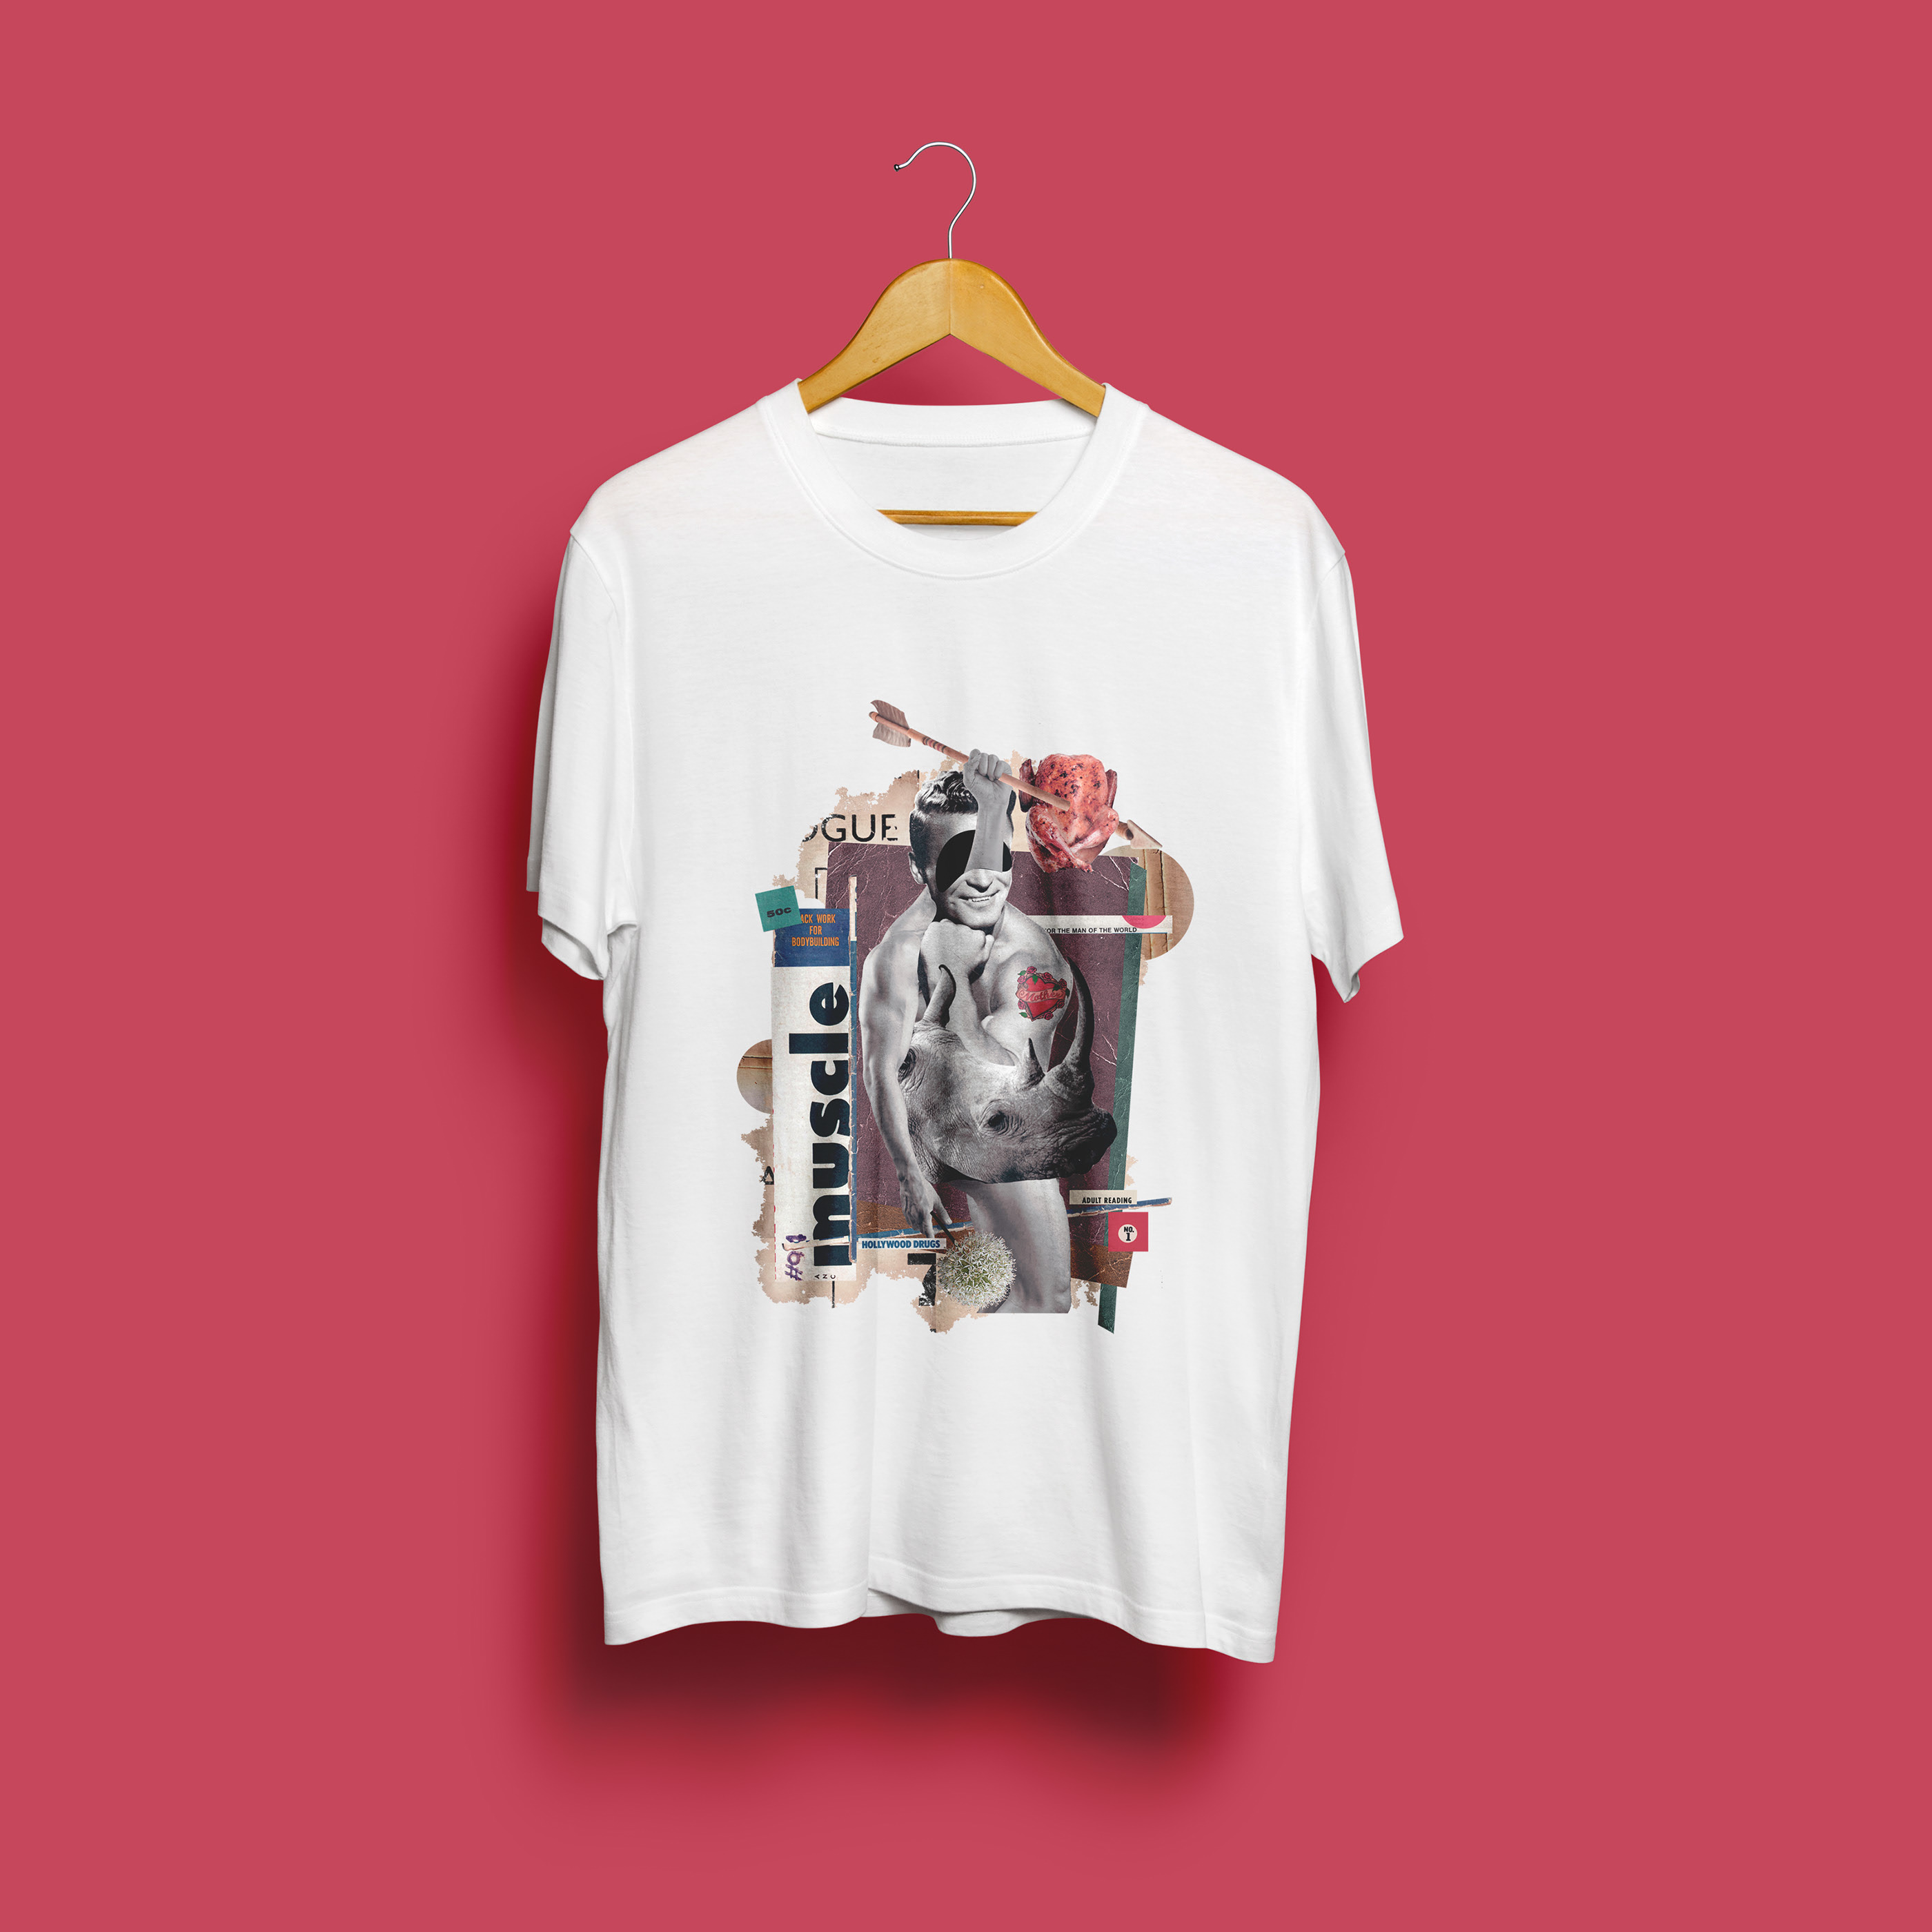 COLLAGE T-SHIRTS on Behance